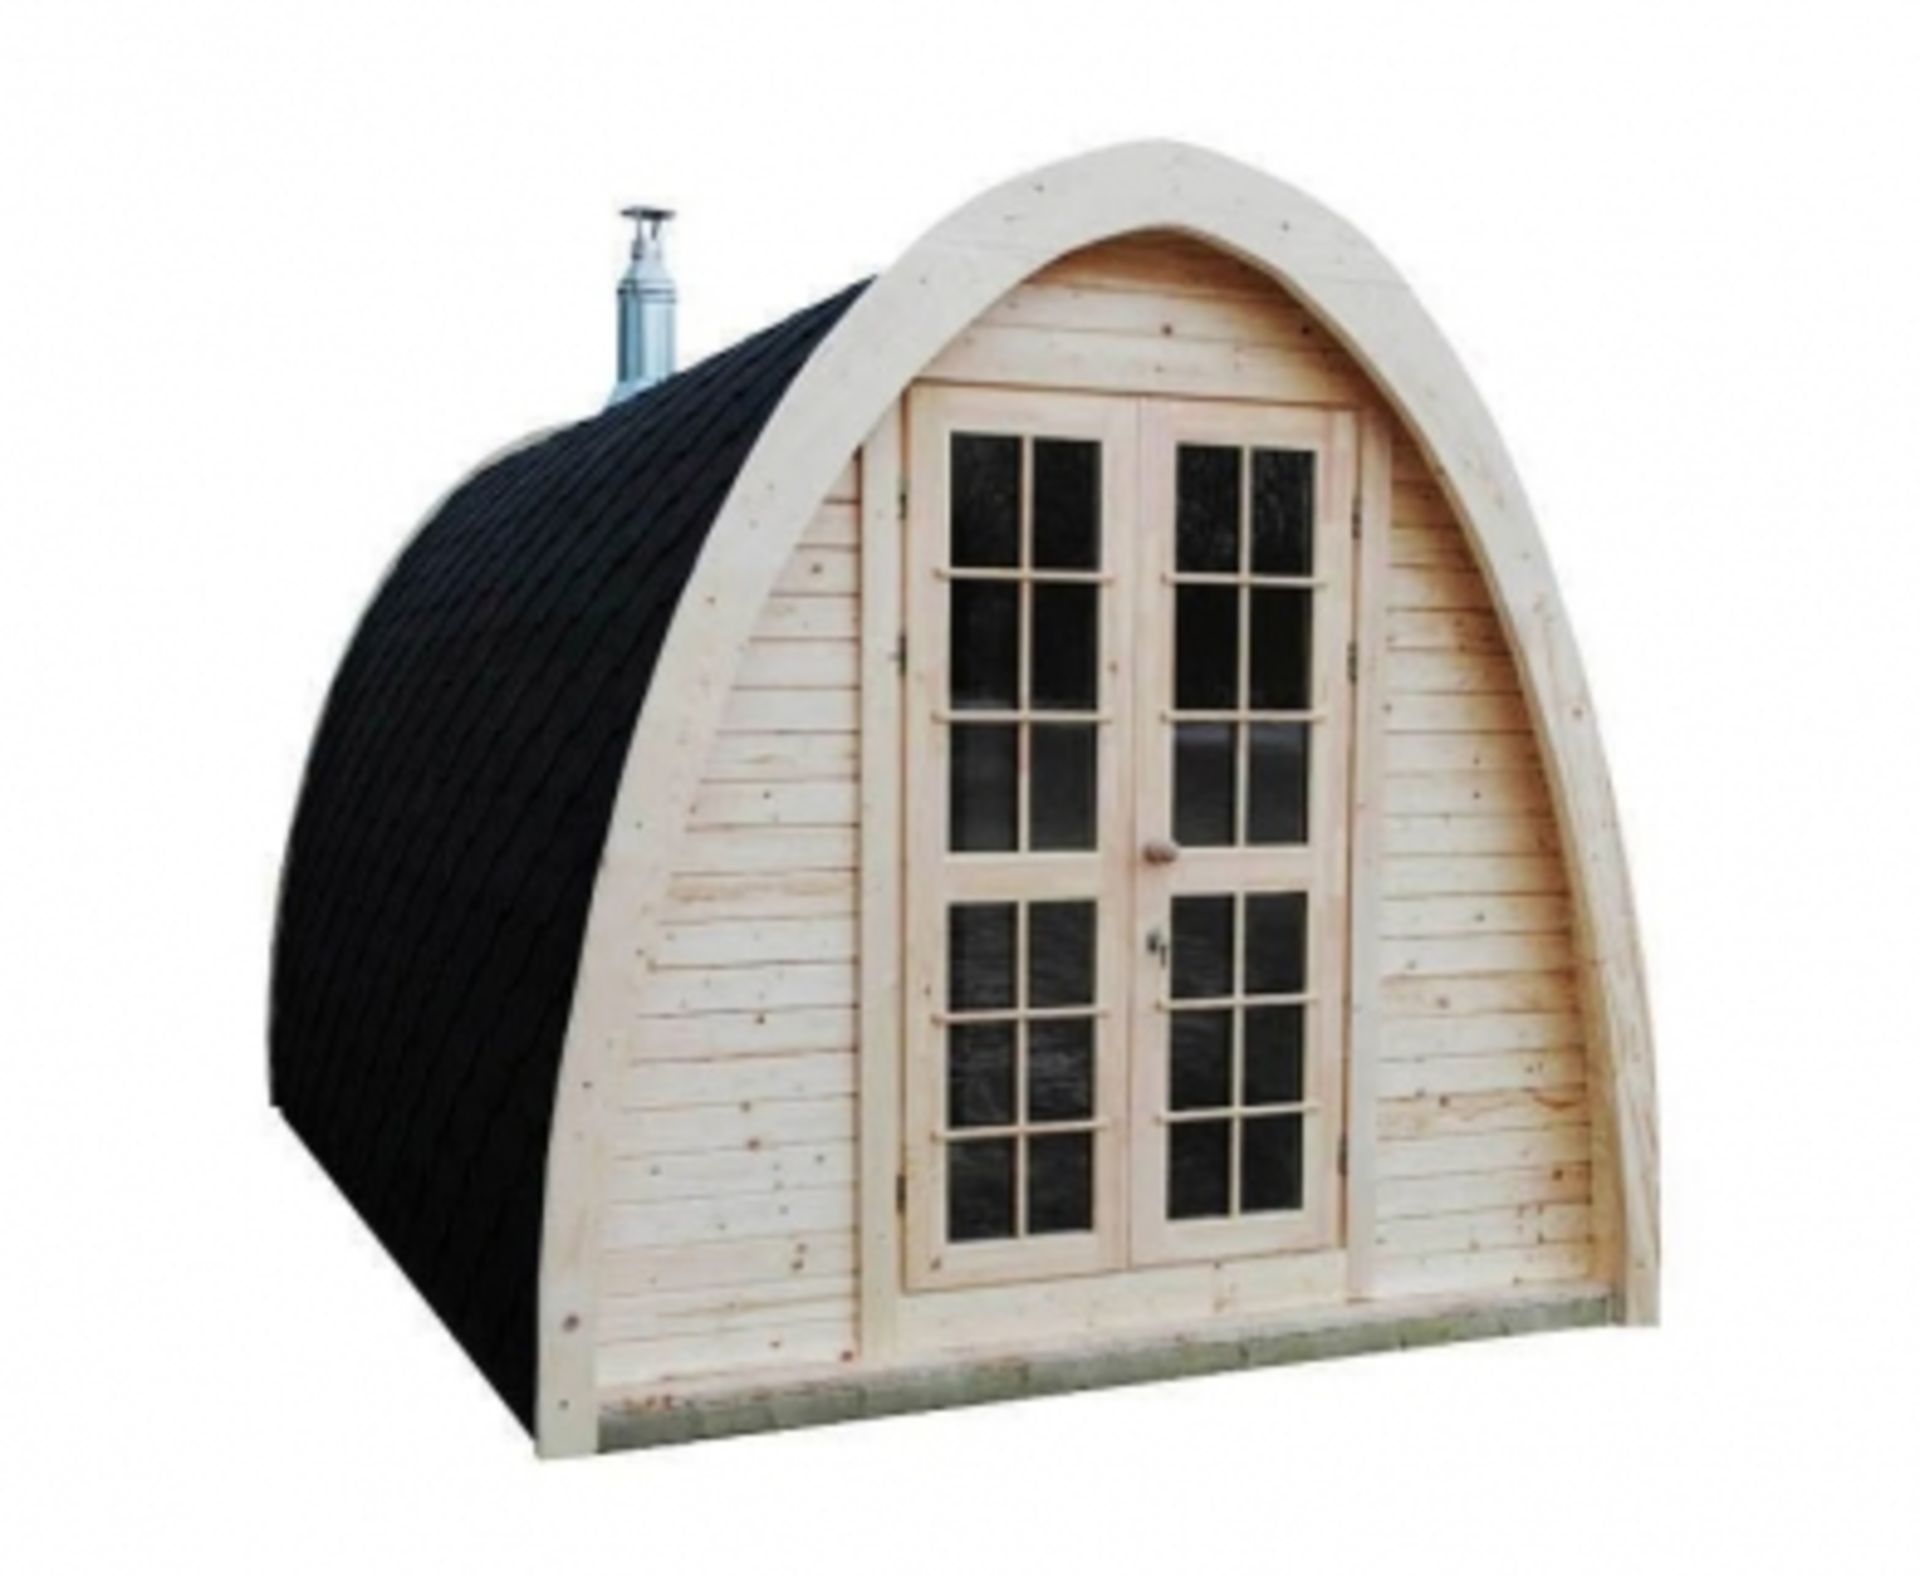 + VAT Brand New 2.4 x 2.3m Sauna Pod From Thermo Wood - Roof Covered With Bitumen Shingles - Two